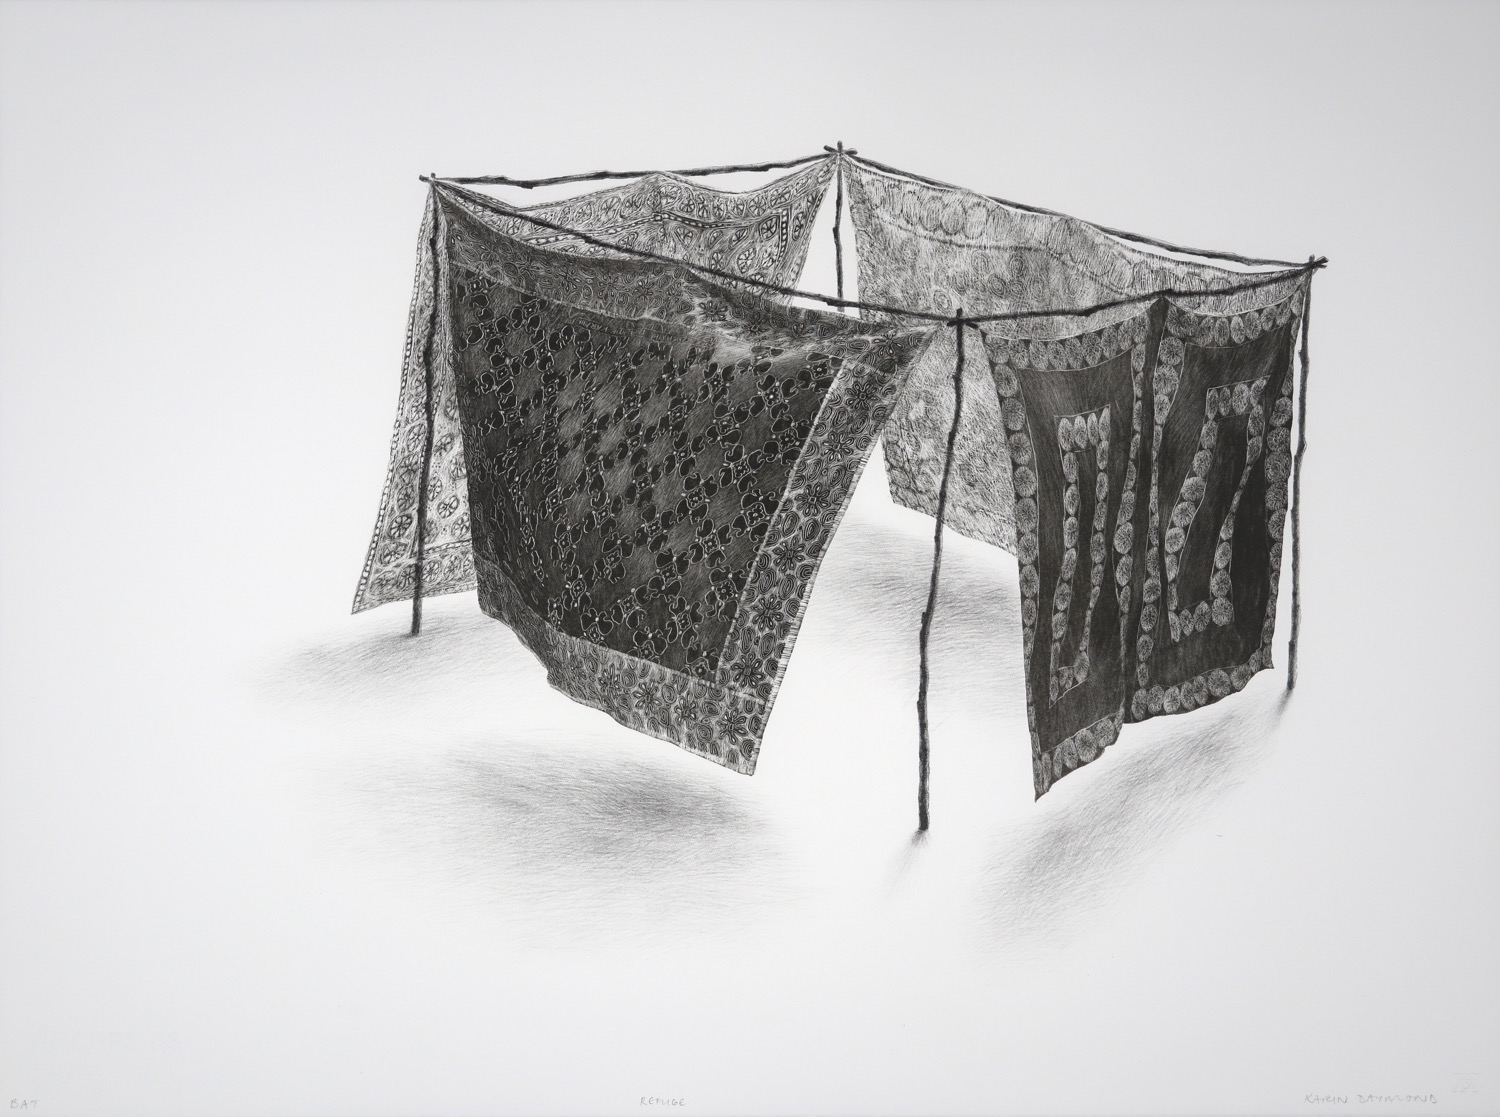 A structure of sticks forming a square shelter with African patterned fabric wraps